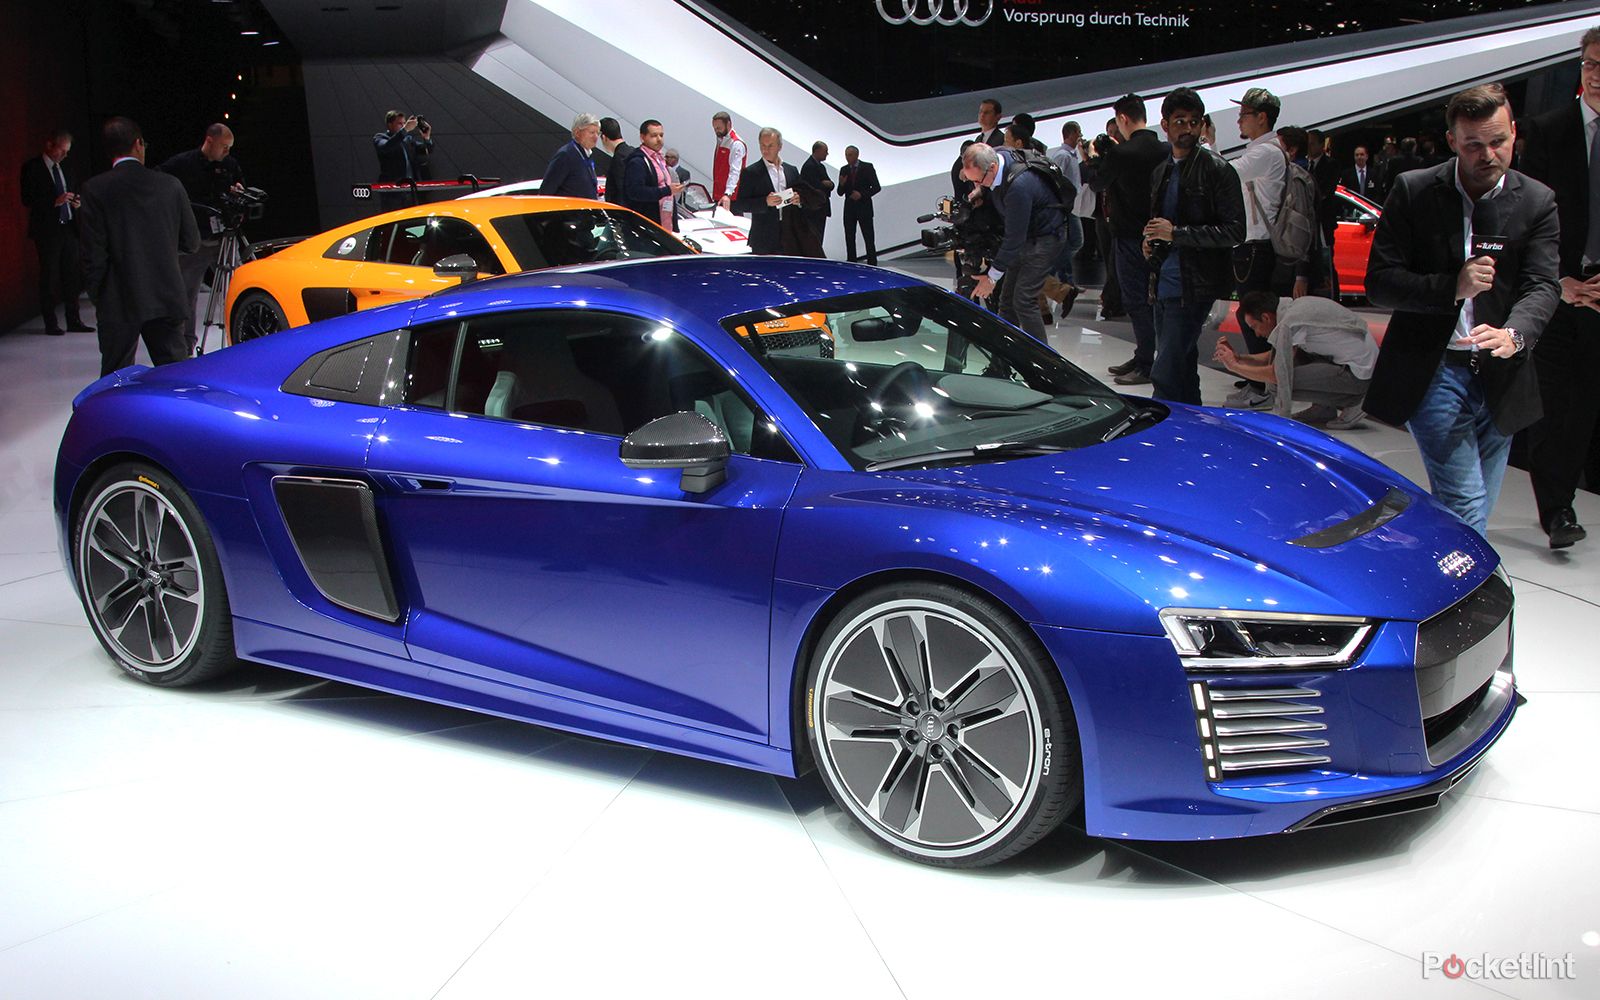 audi r8 e tron 2016 is the electric supercar you’ve been dreaming about if you’re iron man image 1